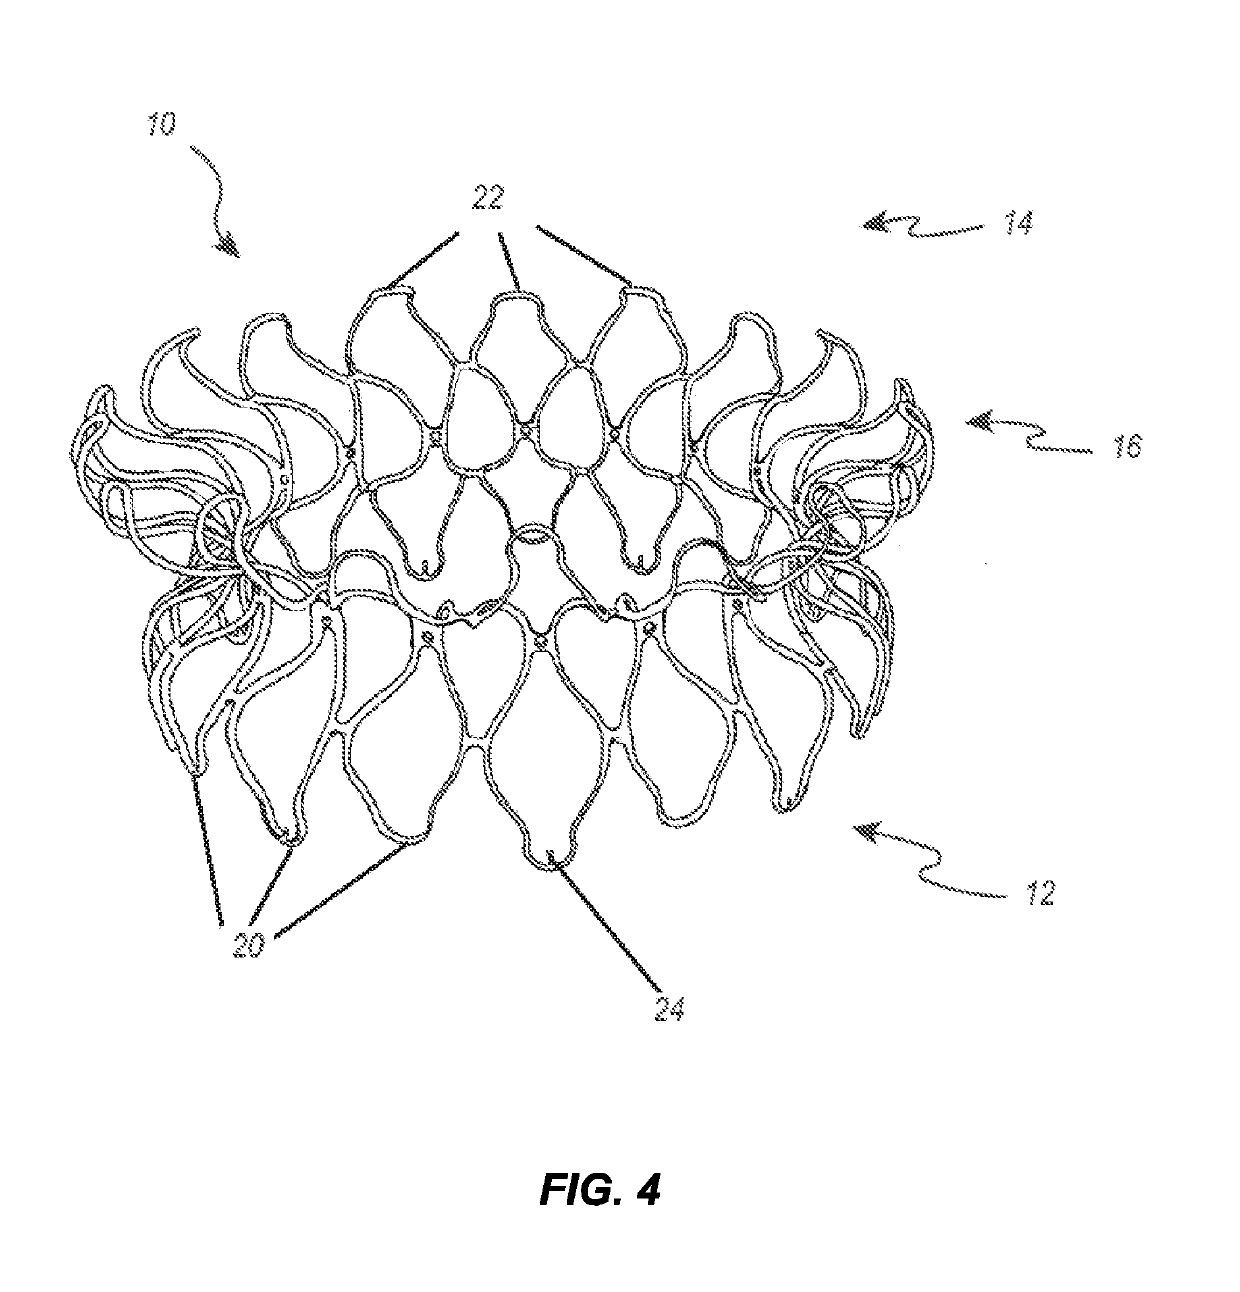 System and methods for delivering and deploying an artificial heart valve within the mitral annulus